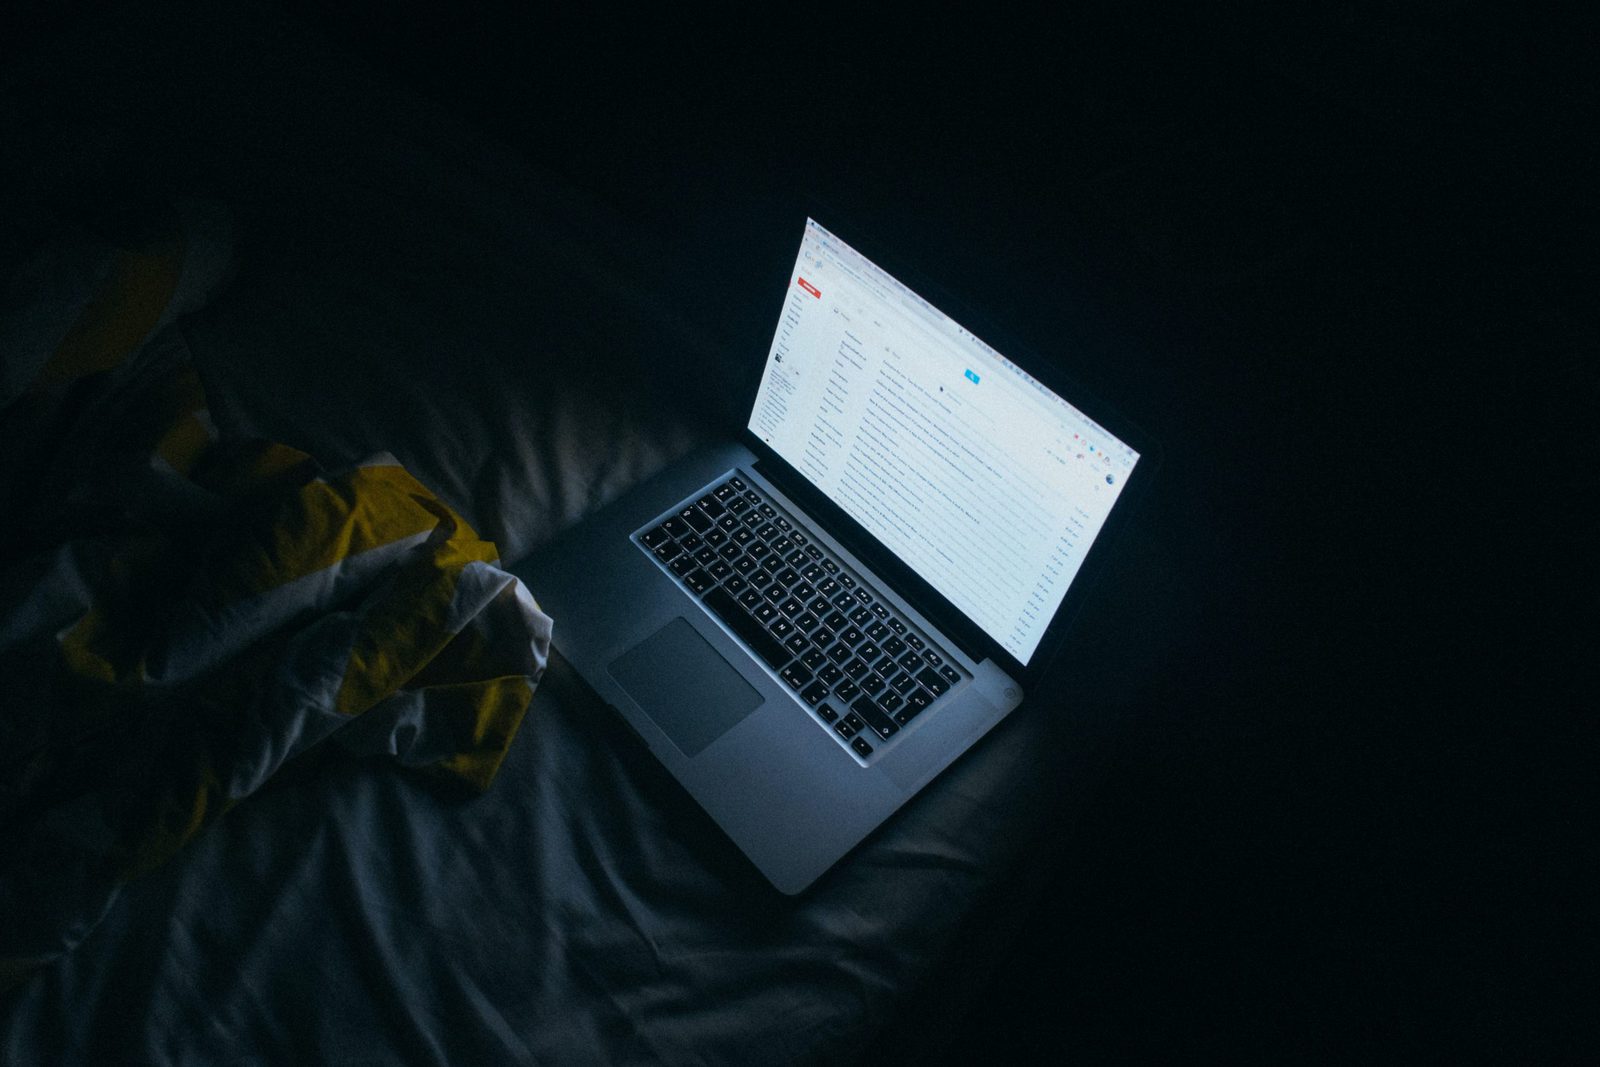 Most insomnias find it hard to resist logging on when we've been awake for hours - but it makes it harder to sleep.